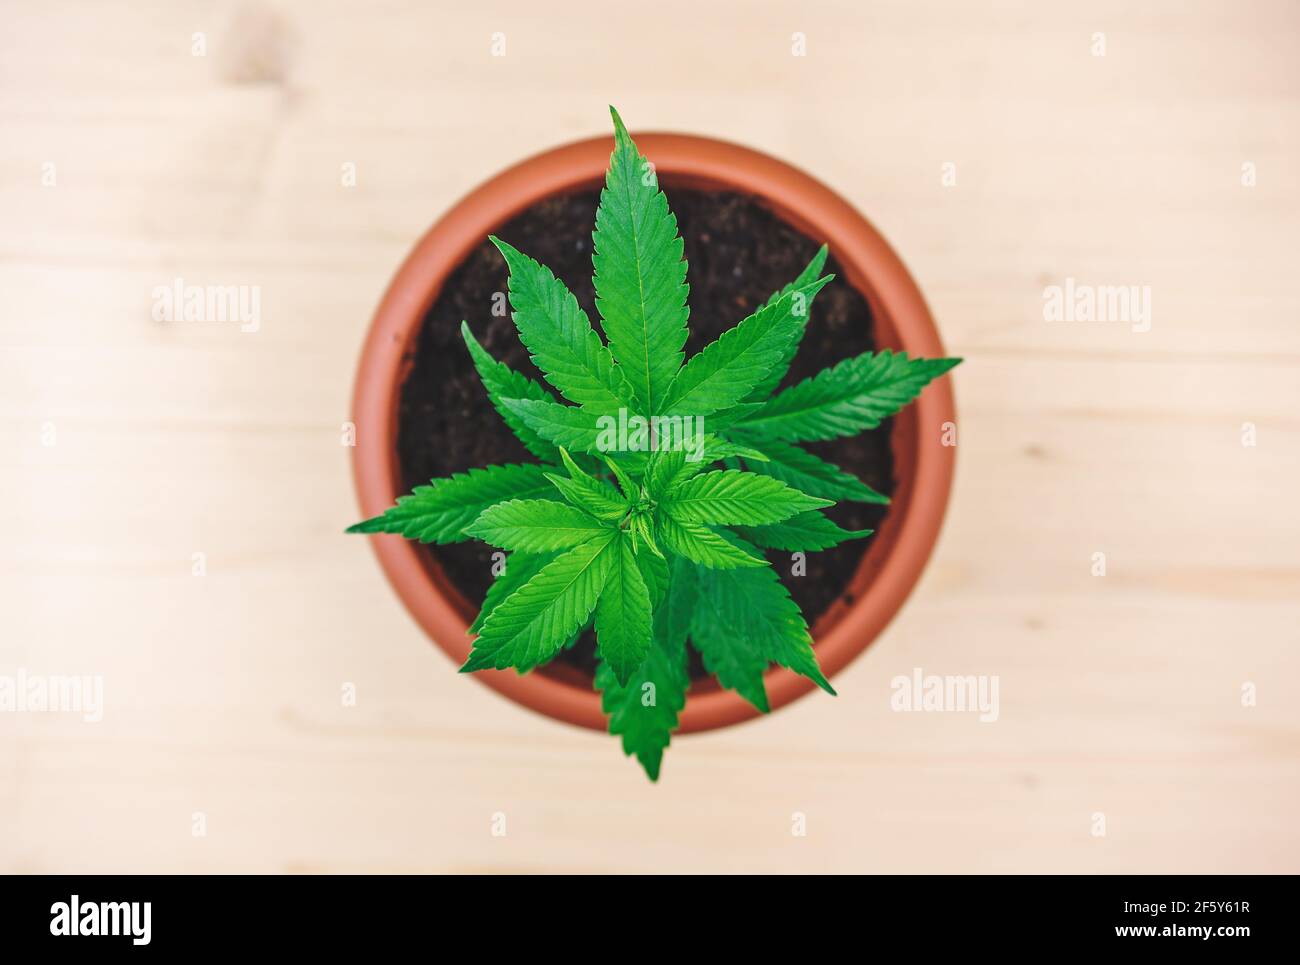 Young Cannabis seedling in pot, Girl scout cookies strain on wooden table Stock Photo